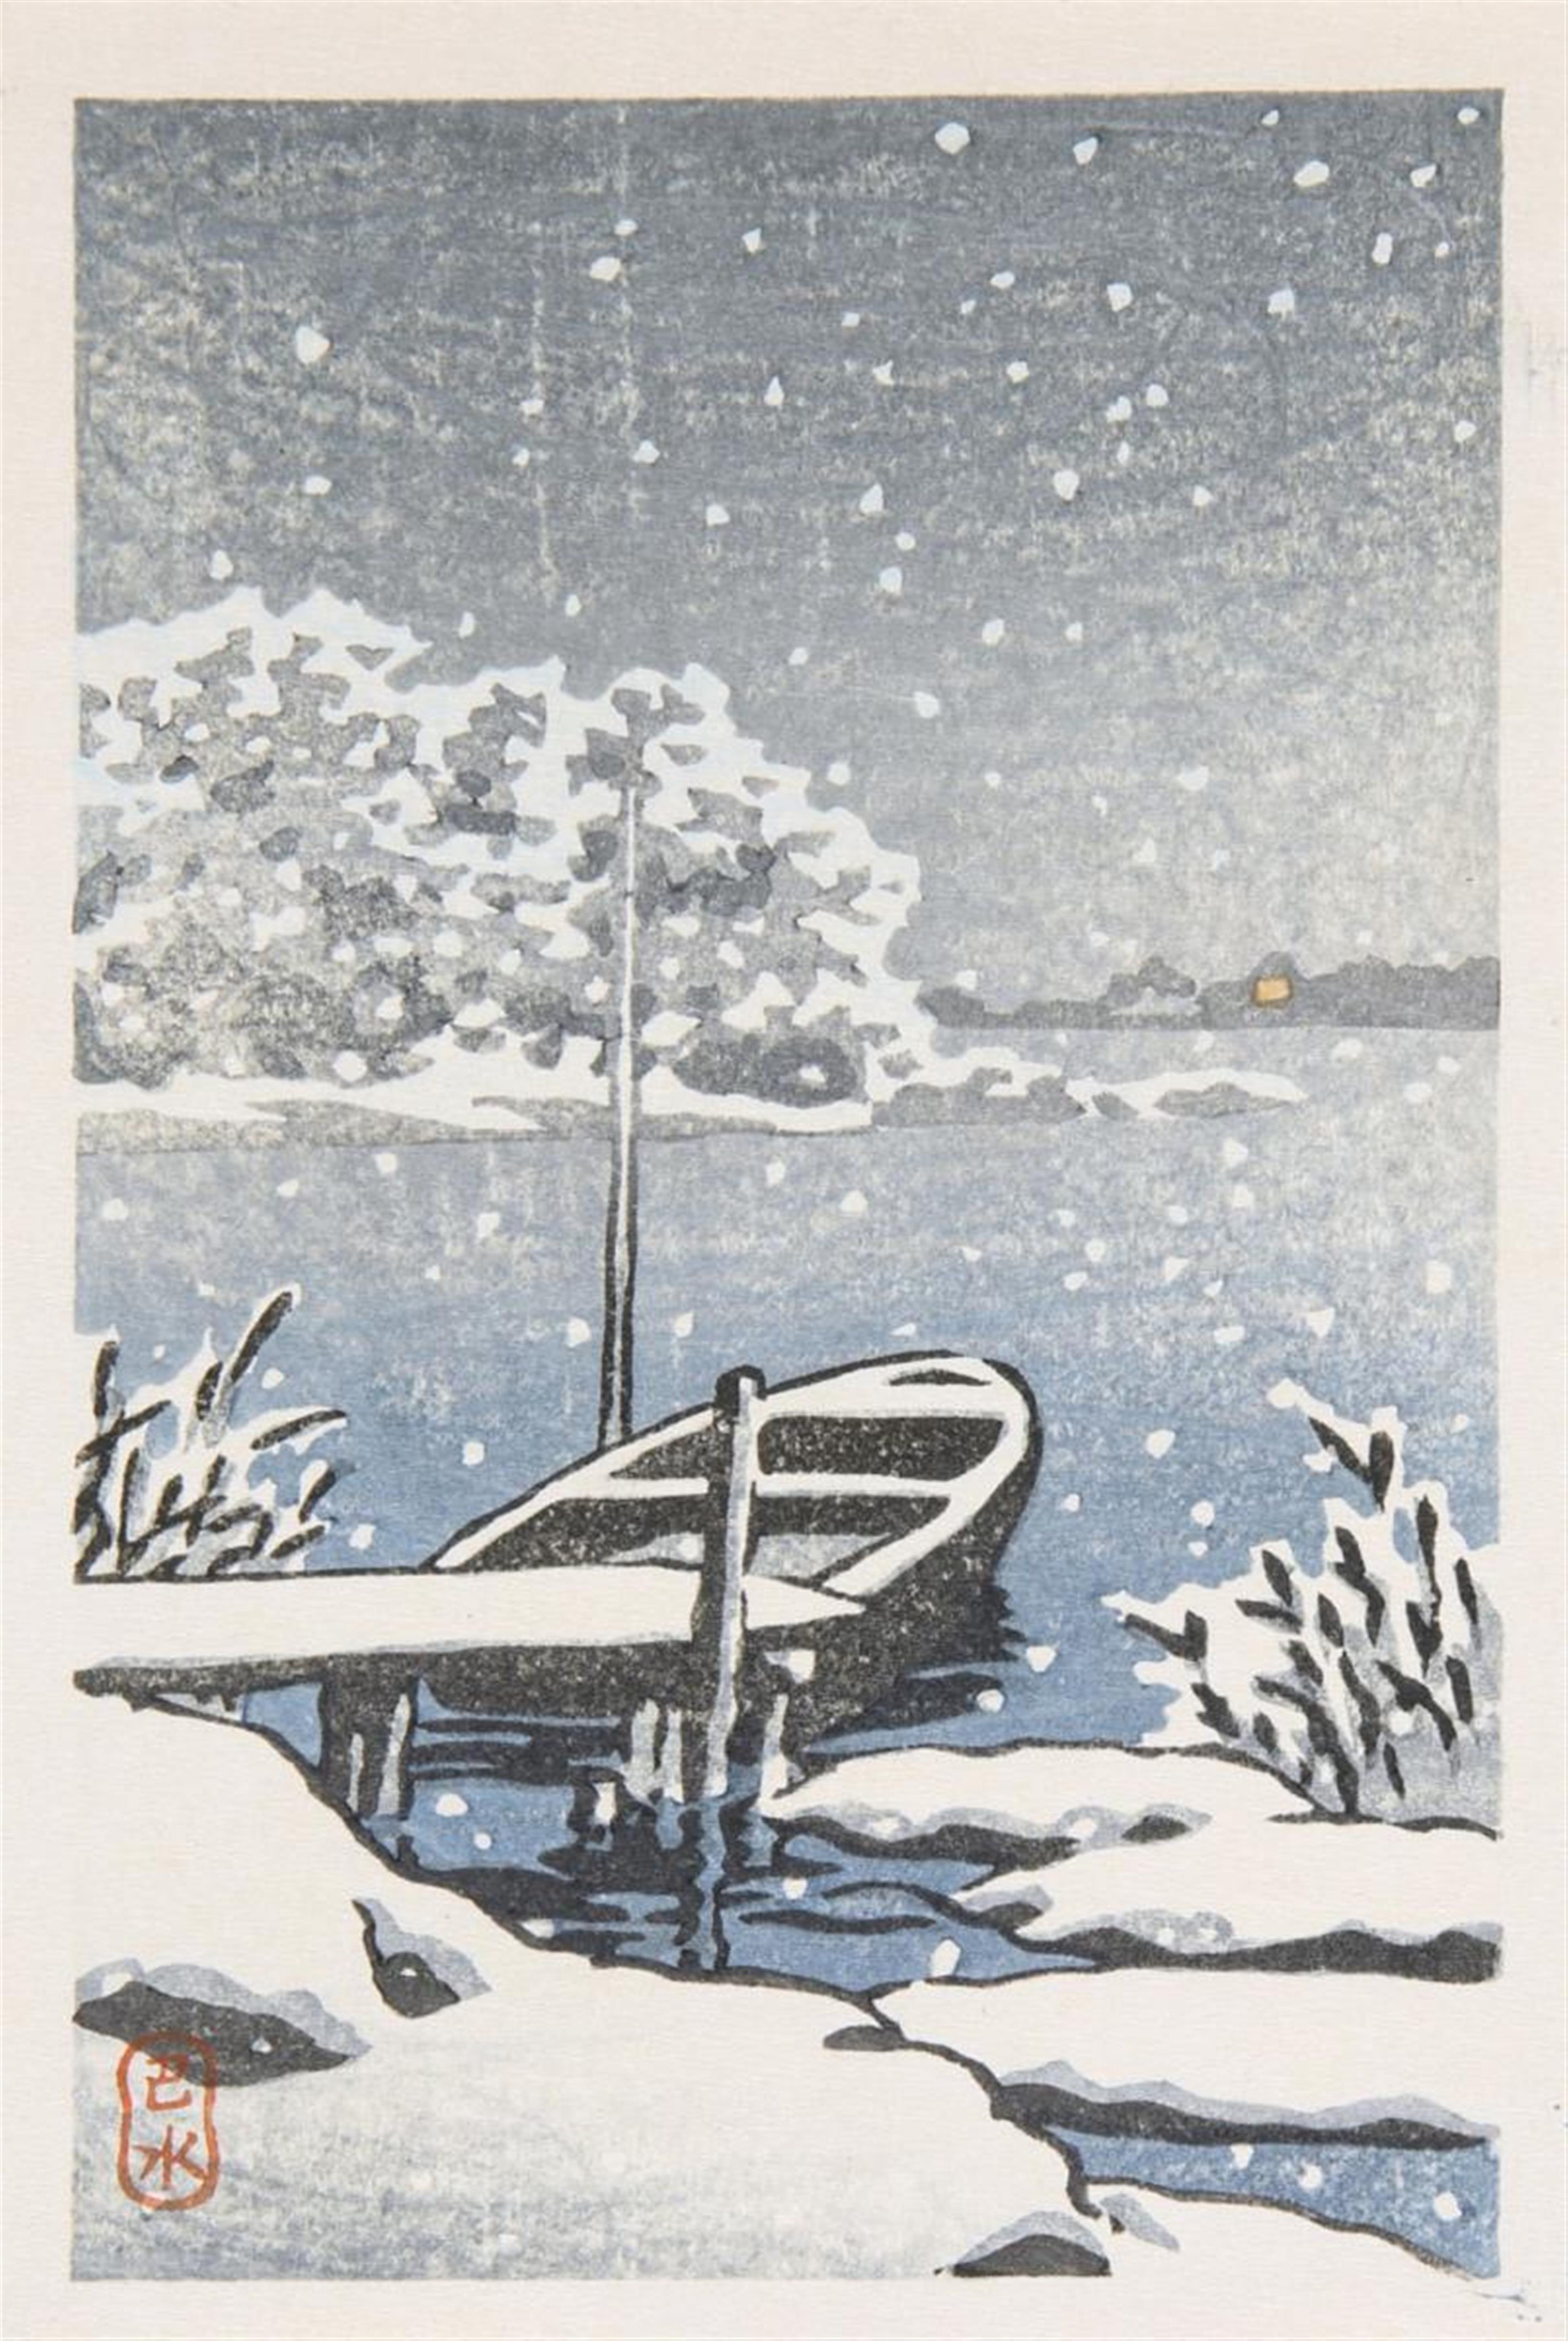 Kawase Hasui - Group of 18 postcard prints. Different sizes (17.7 x 11.5 cm; 15.7 x 10.5 cm; 9.9 x 15 cm) and one double postcard format. Landscapes and cityscapes through the seasons. Seals: ... - image-18